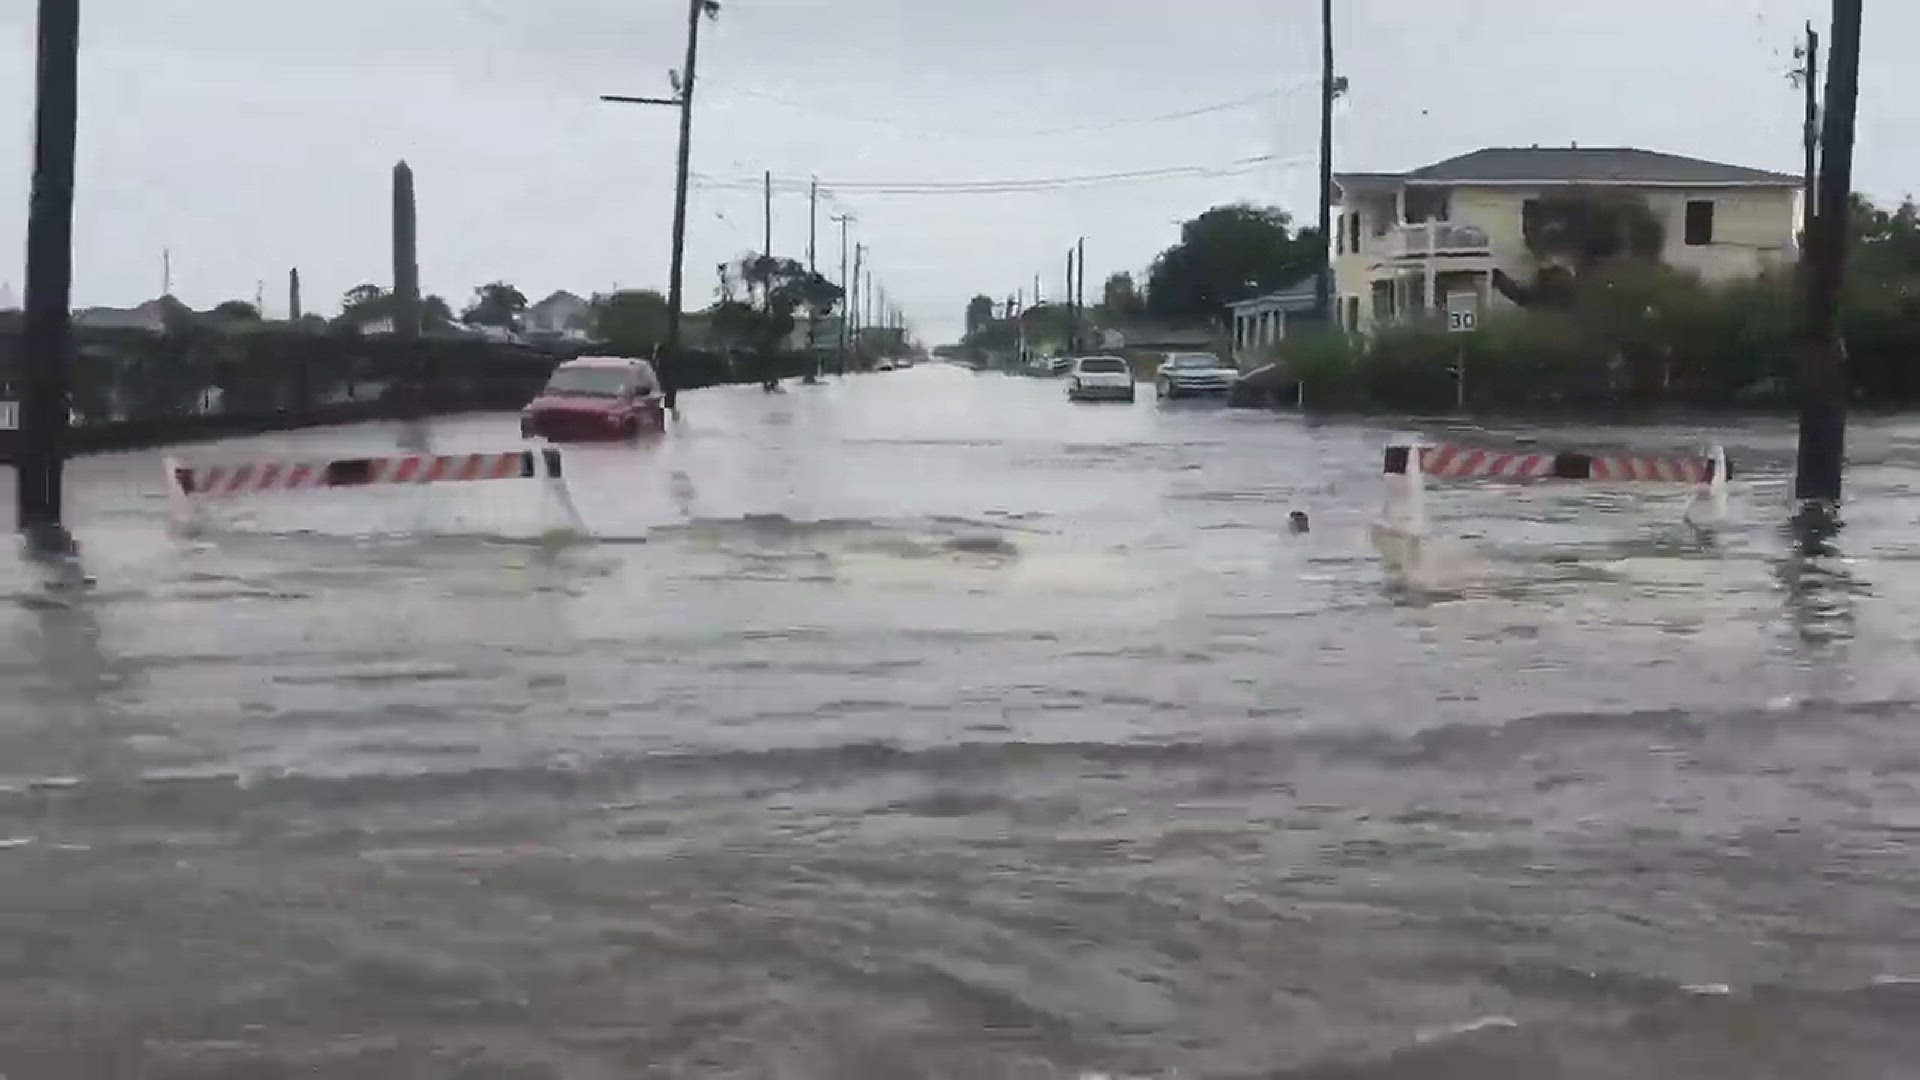 KHOU 11's Matt Dougherty recorded this video on Broadway in Galveston late morning on Sept. 14, 2018